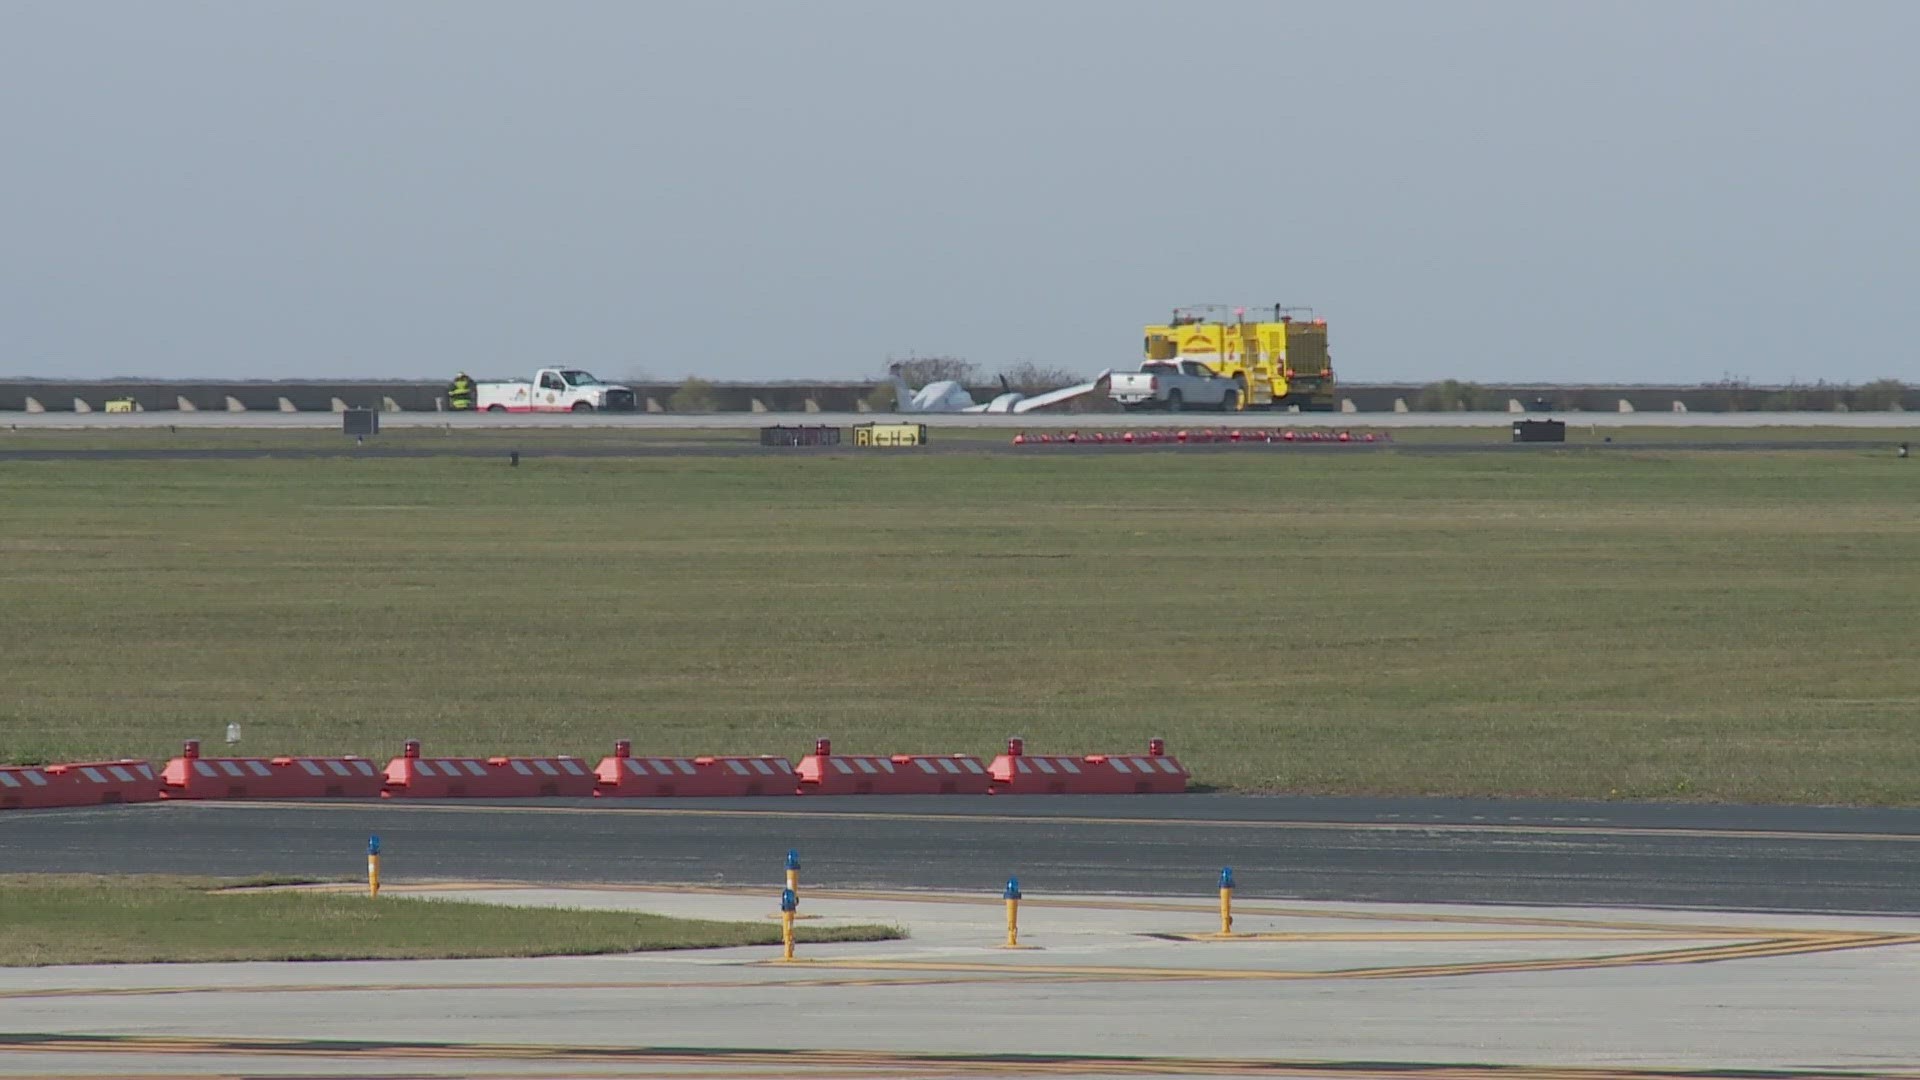 An airport spokesperson told WWL Louisiana that the plane did not crash and there were no injuries.